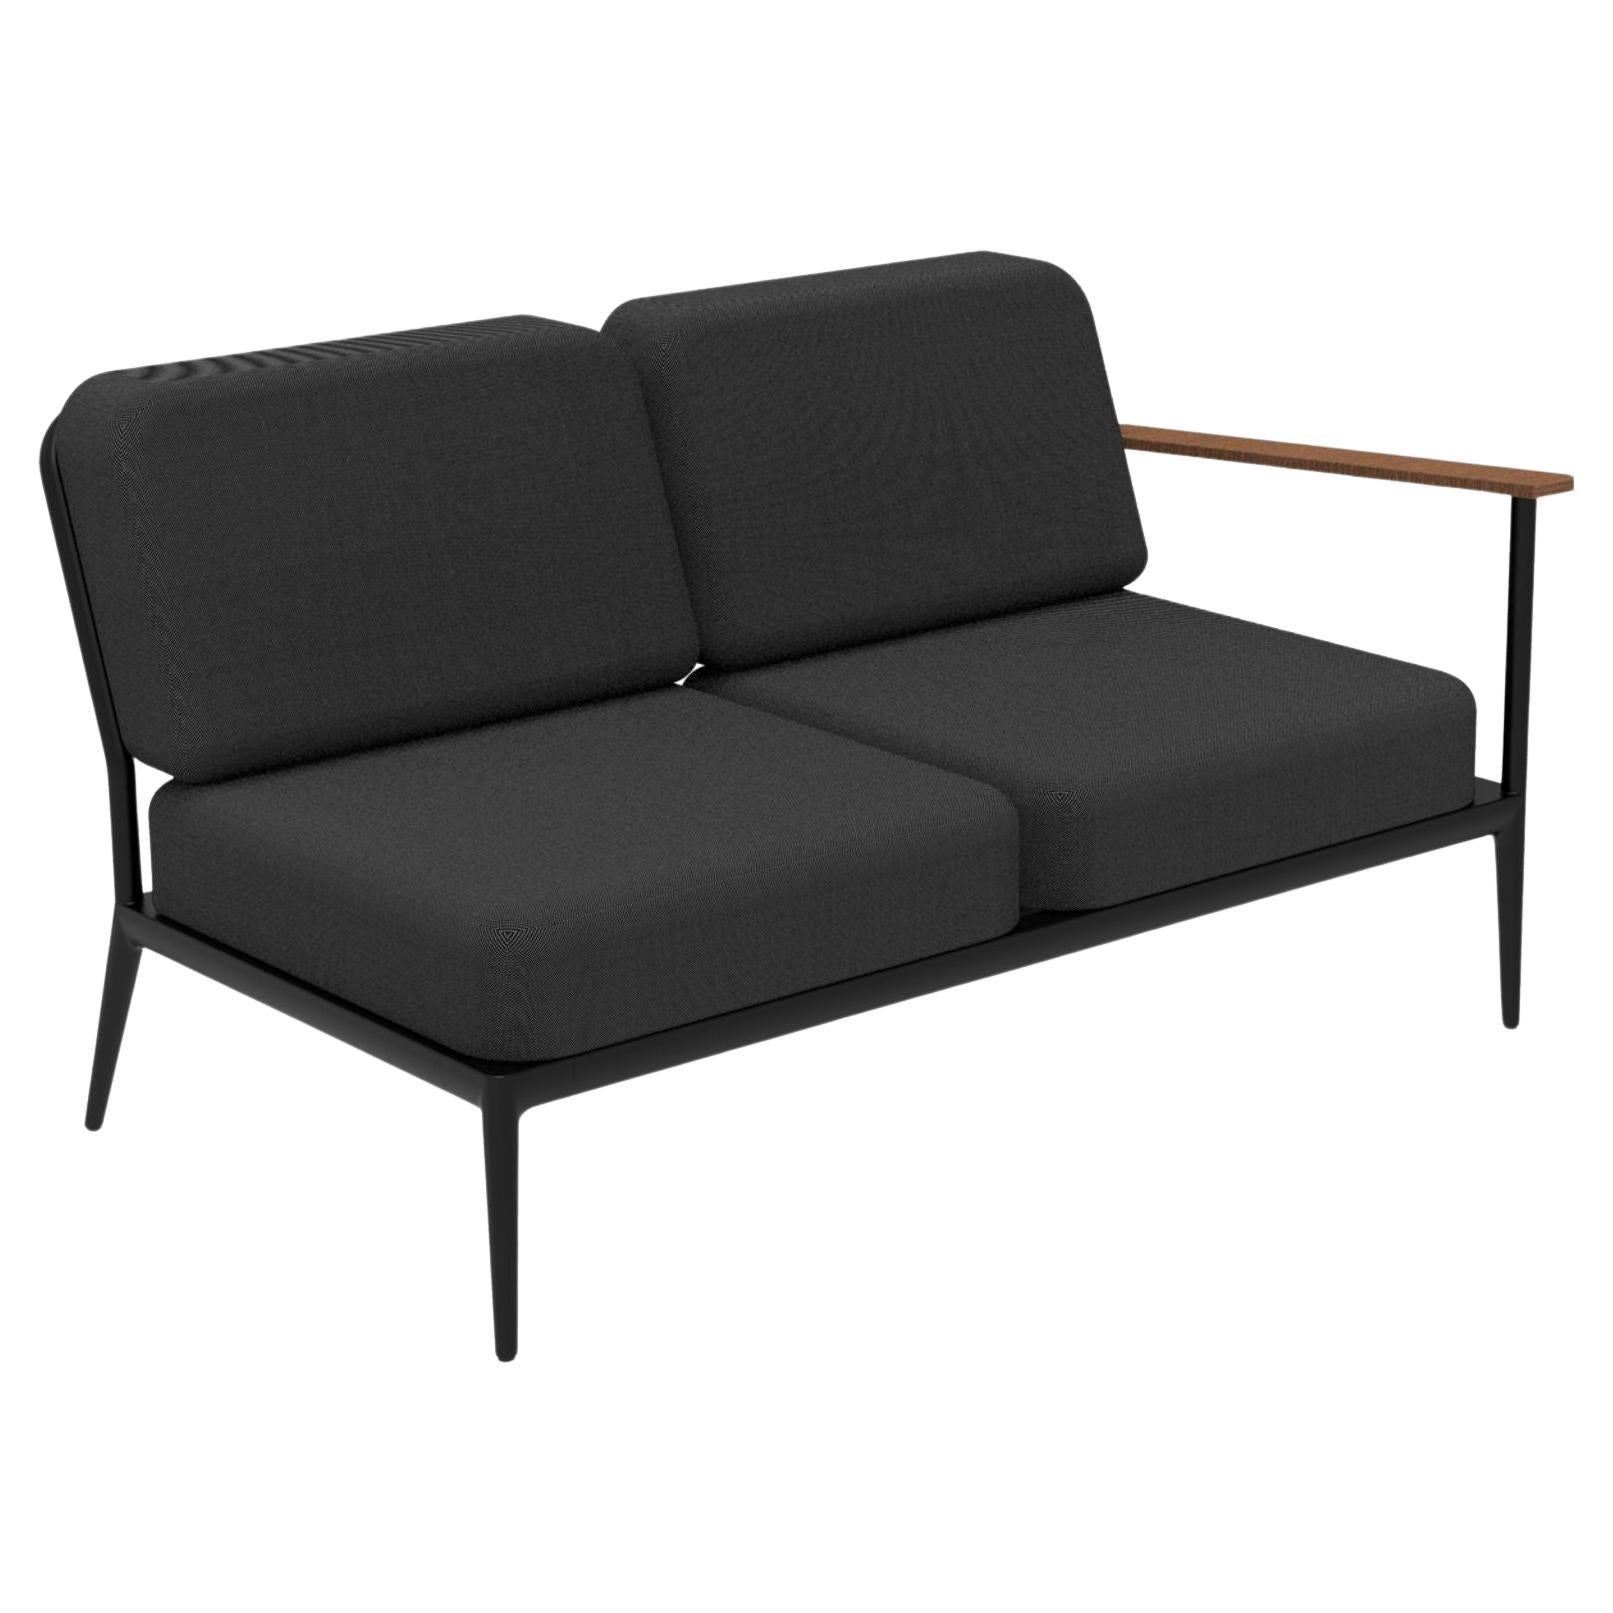 Nature Black Double Left Modular Sofa by MOWEE For Sale